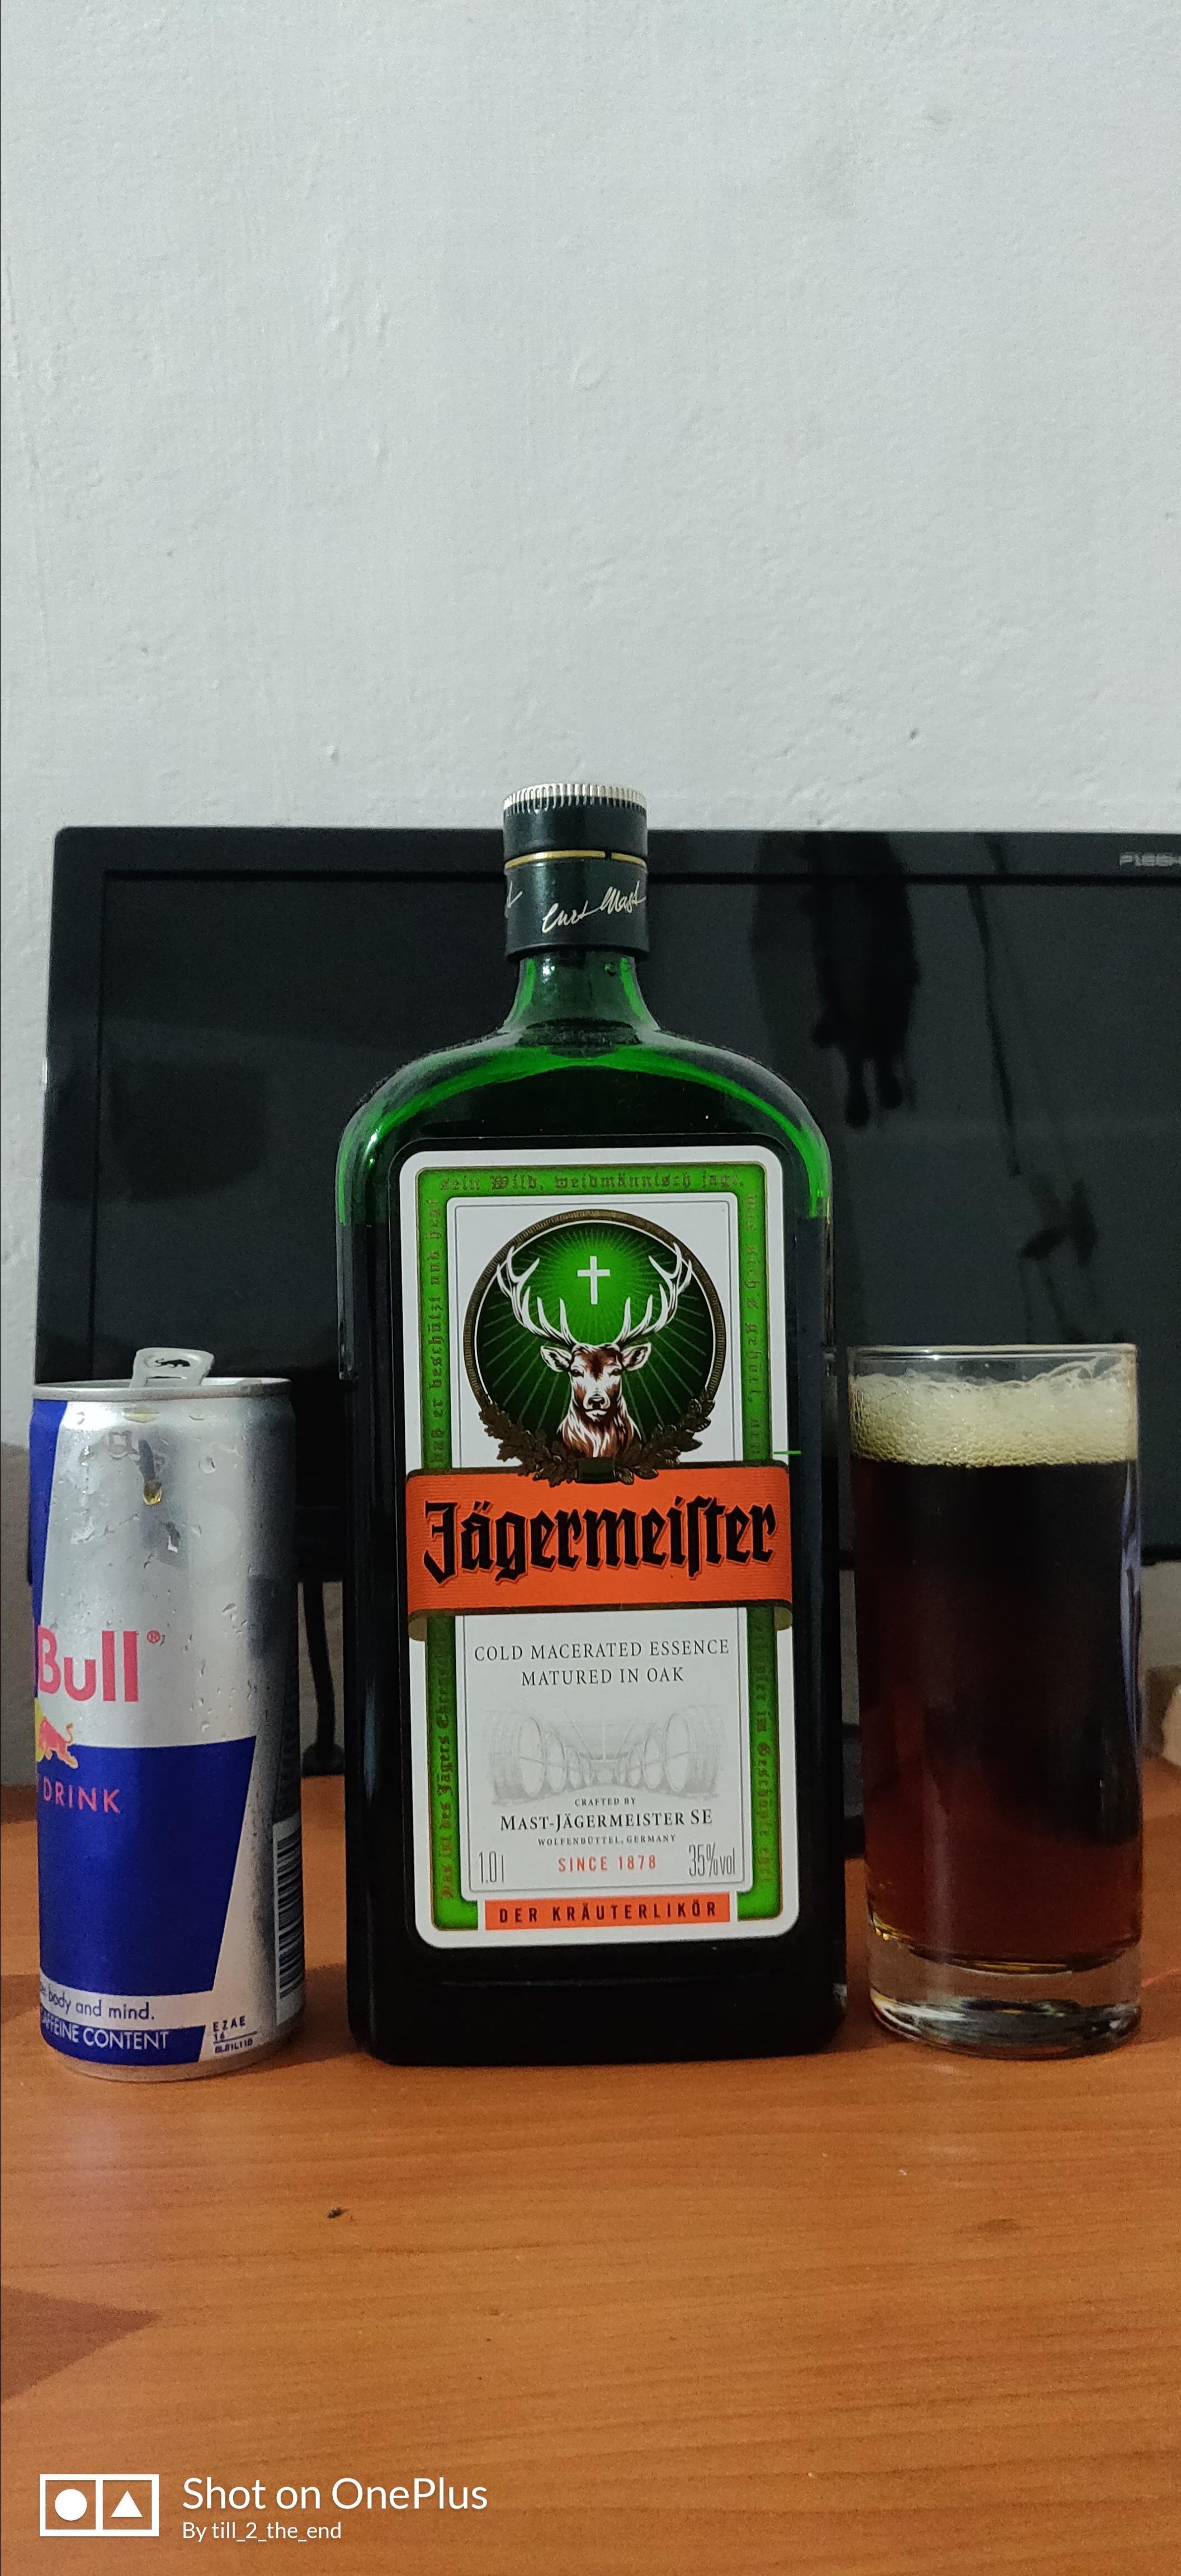 jagermeister alcohol